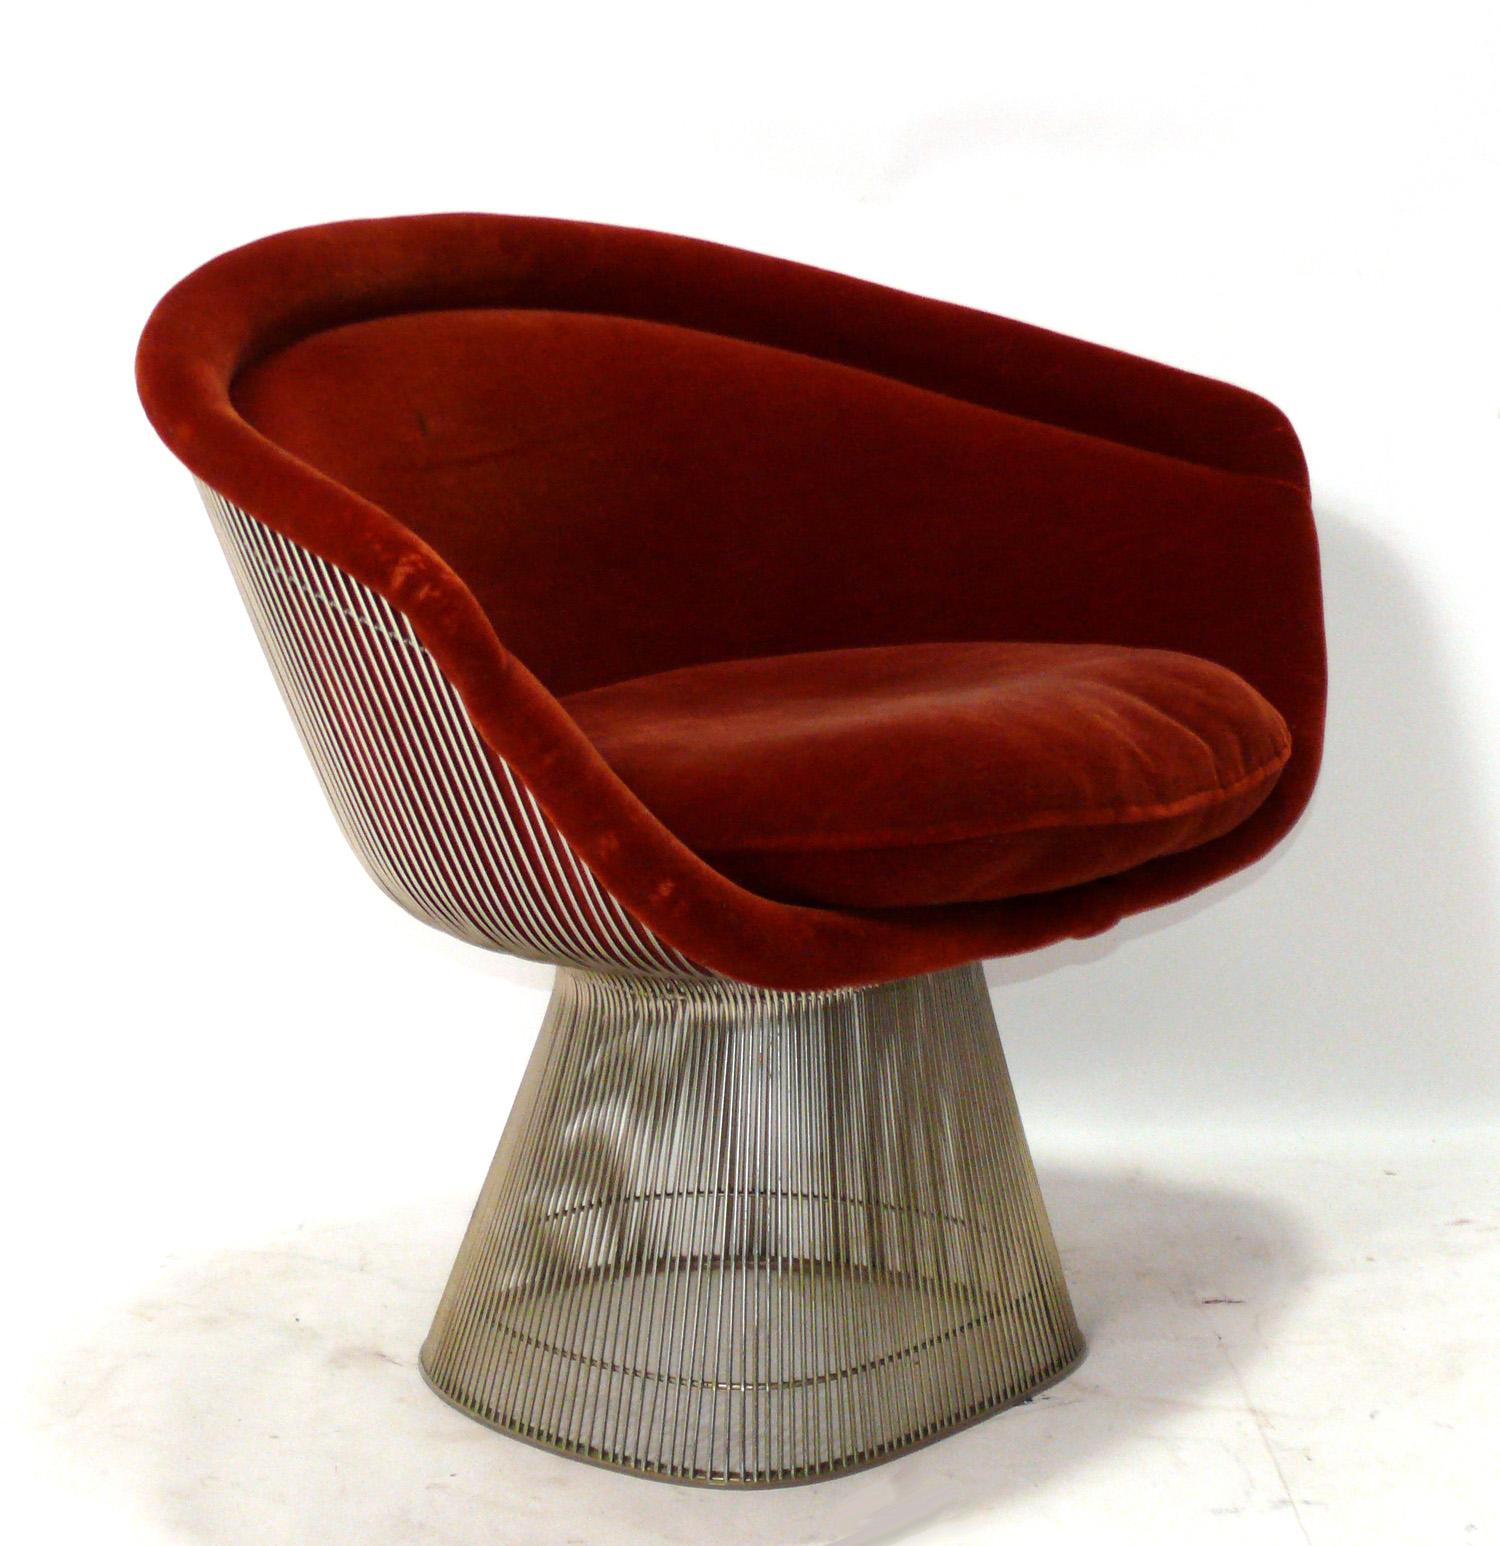 Sculptural modern lounge chair in nickel finish, designed by Warren Platner for Knoll, circa 1980s. Signed with Knoll label. This chair is currently being reupholstered and can be completed in your fabric. Simply send us 5 yards of your fabric after